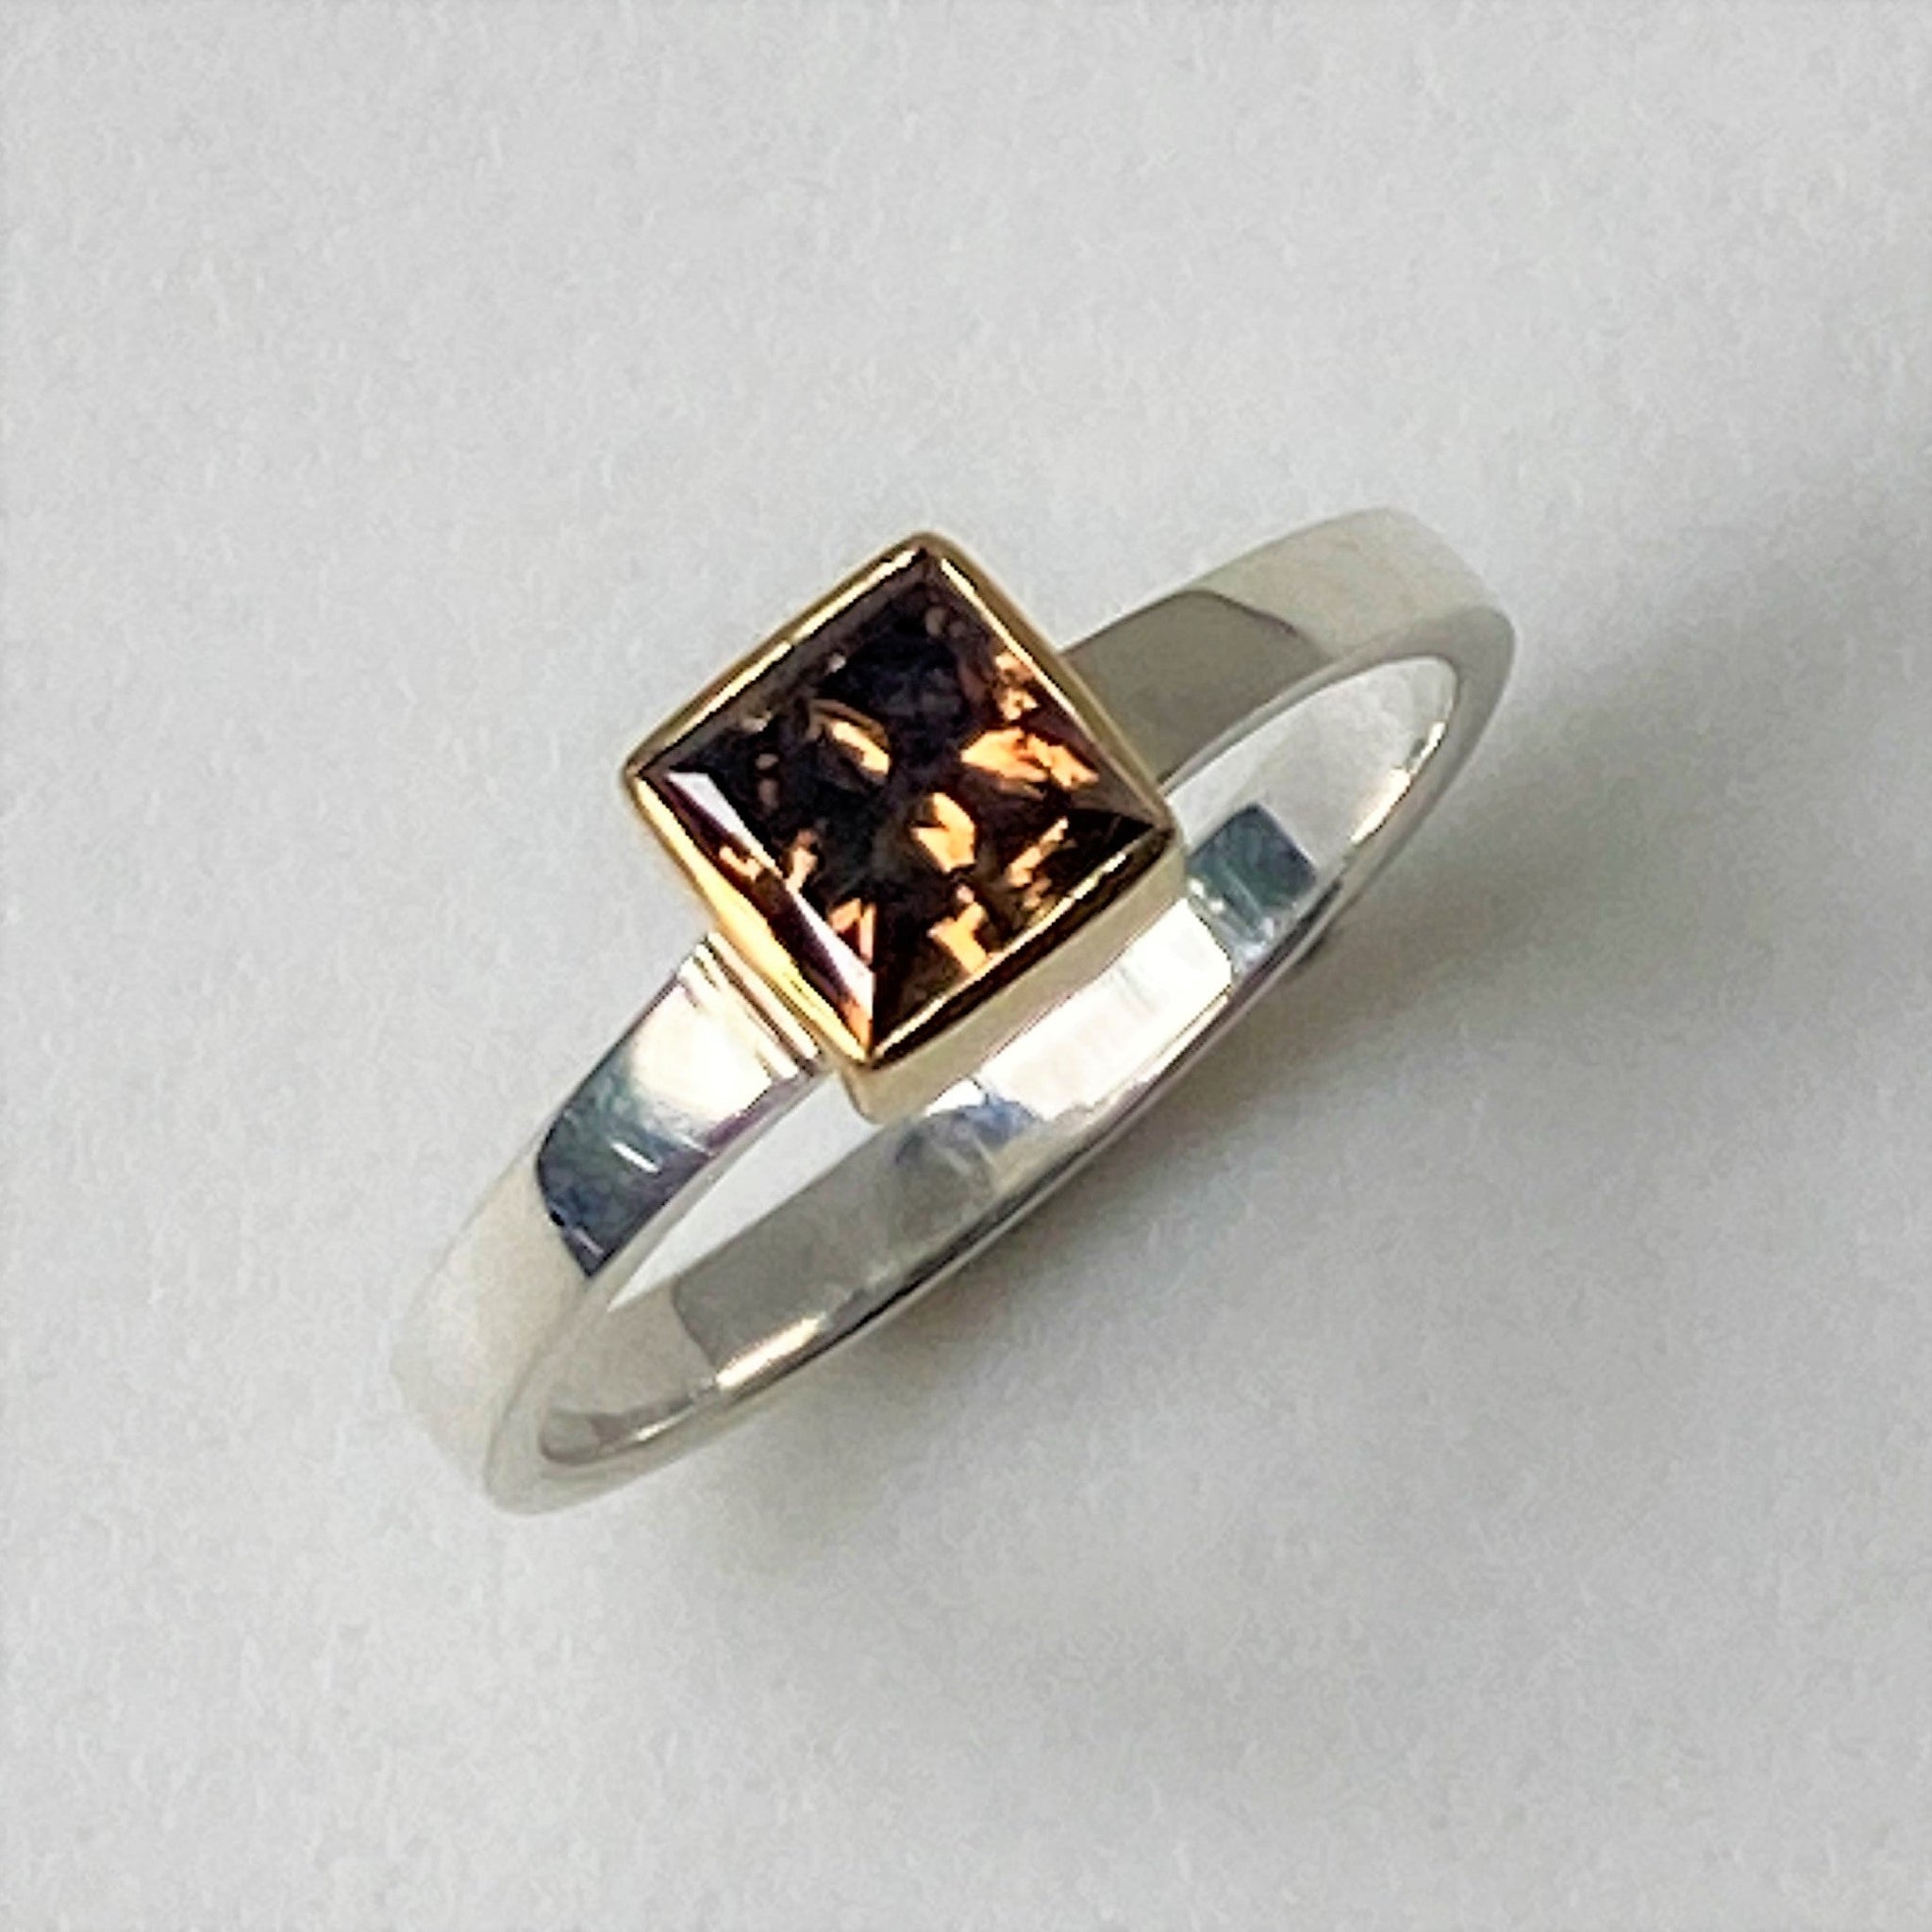 18ct Gold, Sterling Silver and Fancy Dark Brown Diamond Ring